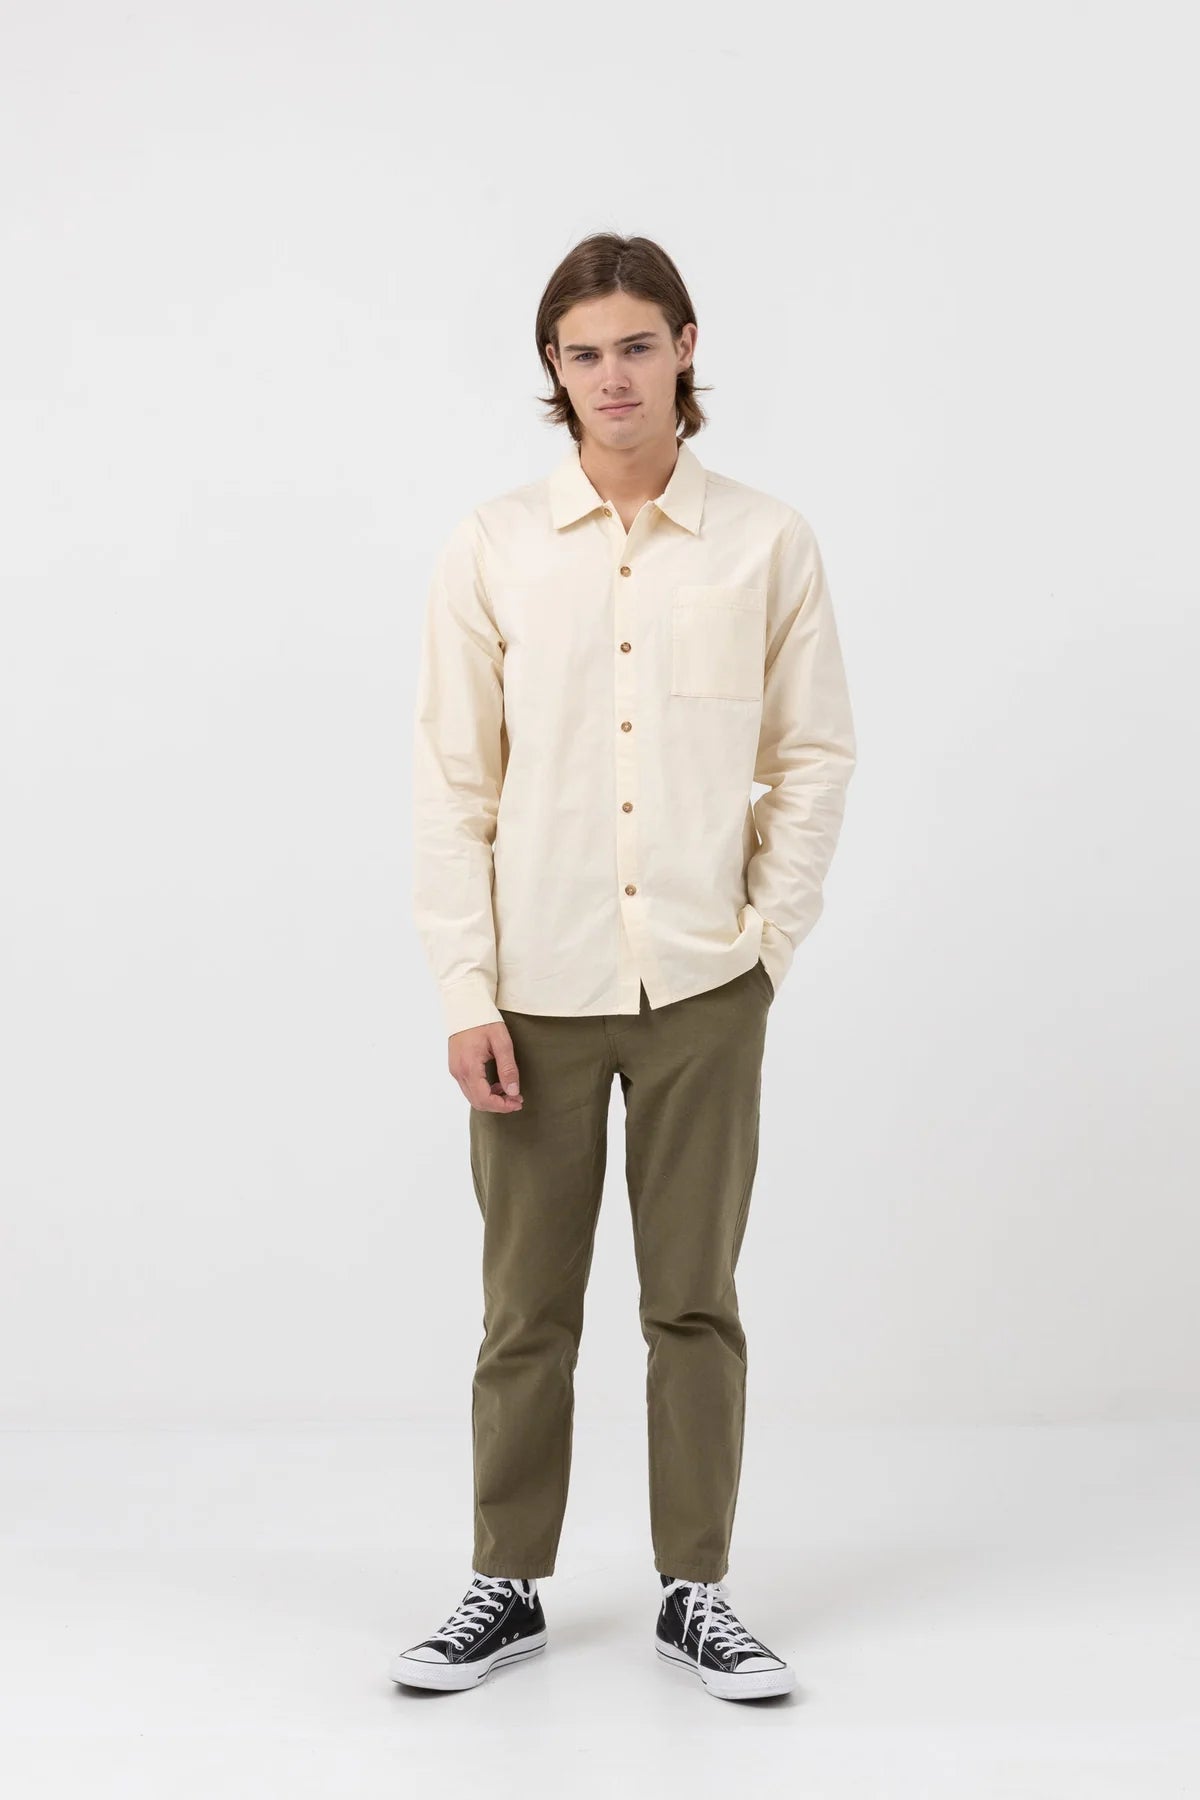 Rhythm Essential Ls Shirt Natural | Collective Request 